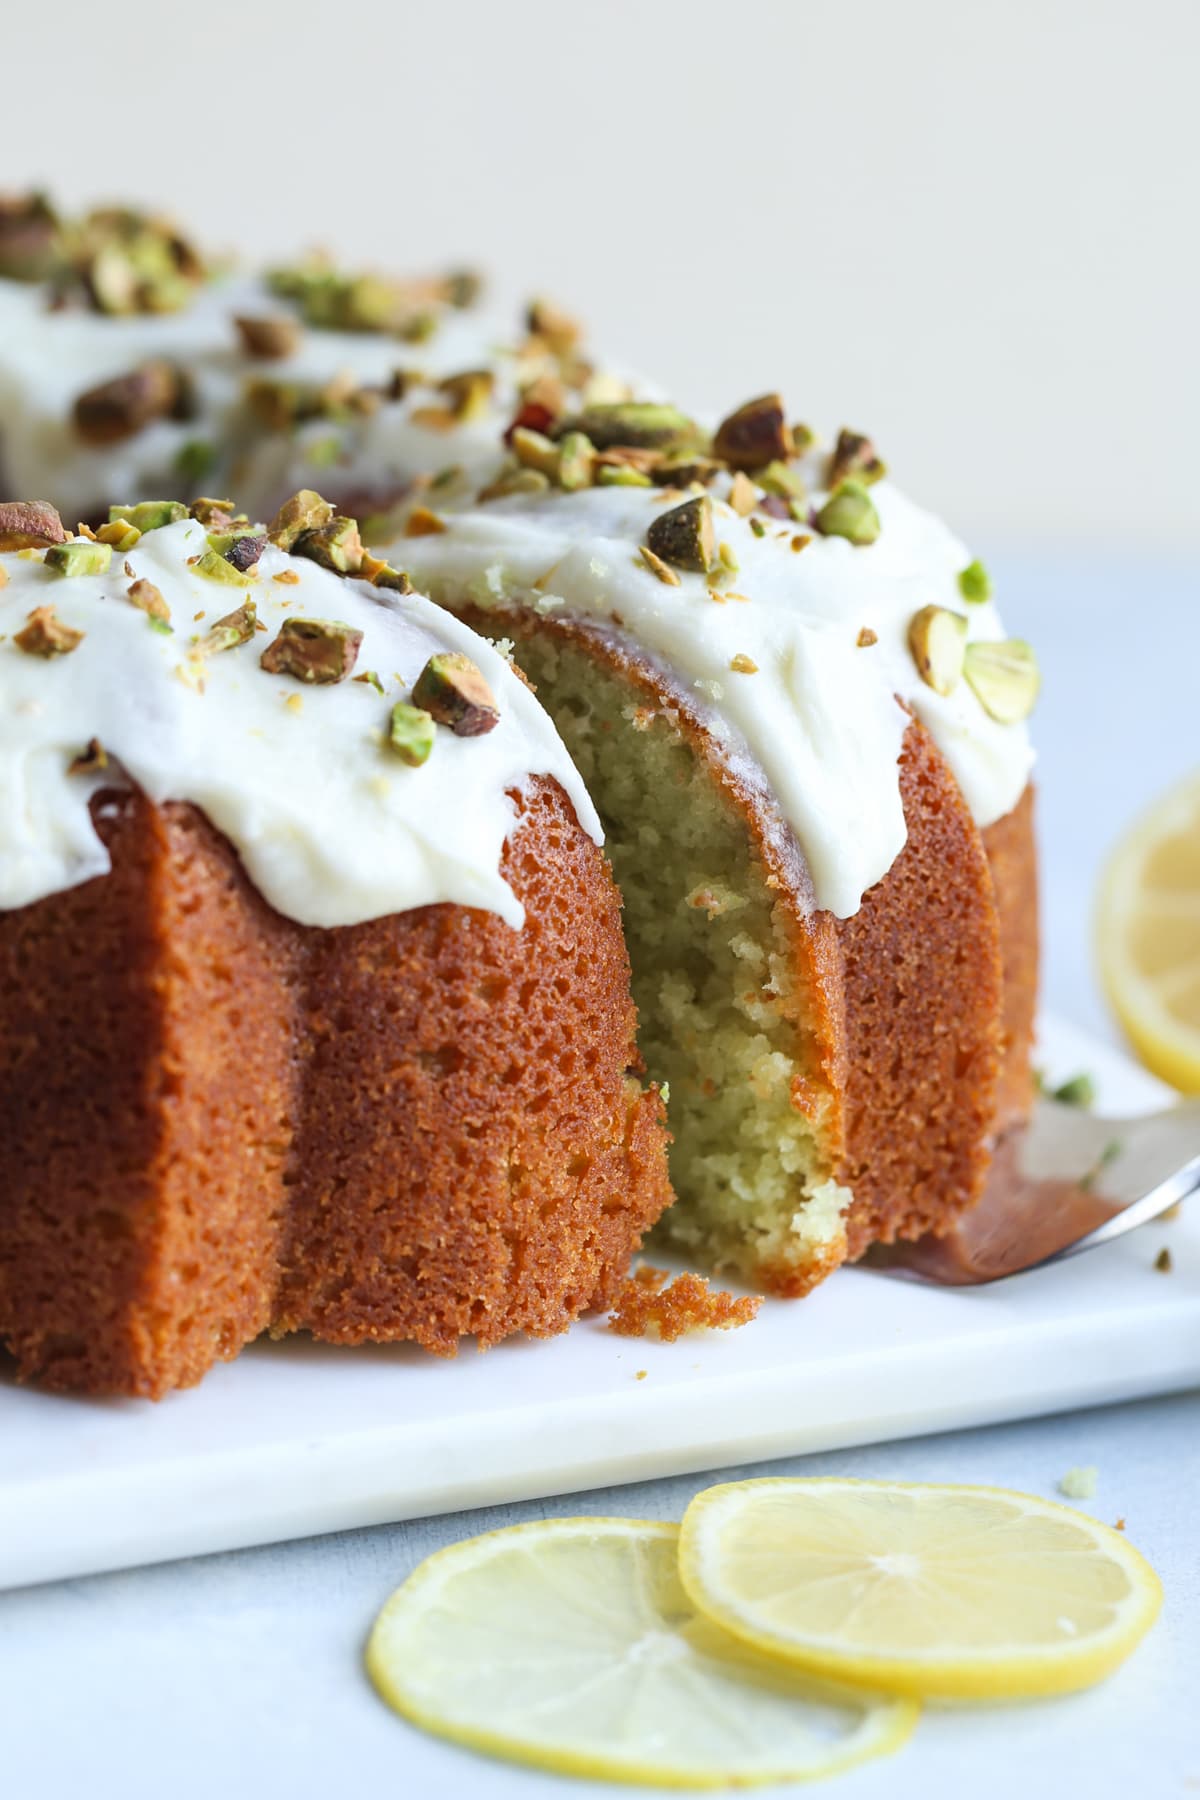 Slicing a piece of pistachio bundt cake topped with icing and chopped pistachios